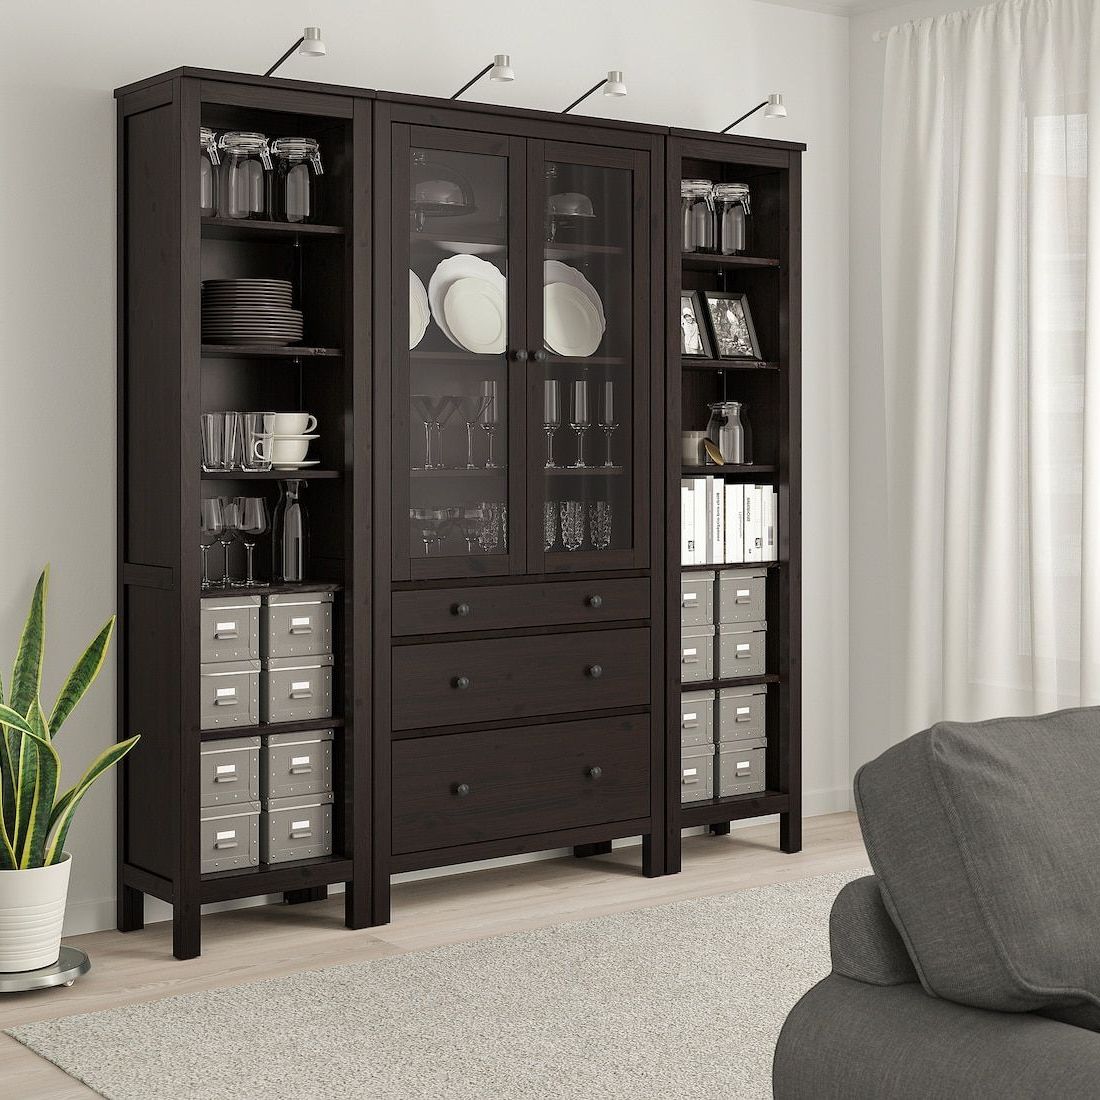 Hemnes Storage Combination W Doors/drawers – Black Brown Pertaining To Dark Brown Tv Cabinets With 2 Sliding Doors And Drawer (Gallery 10 of 20)